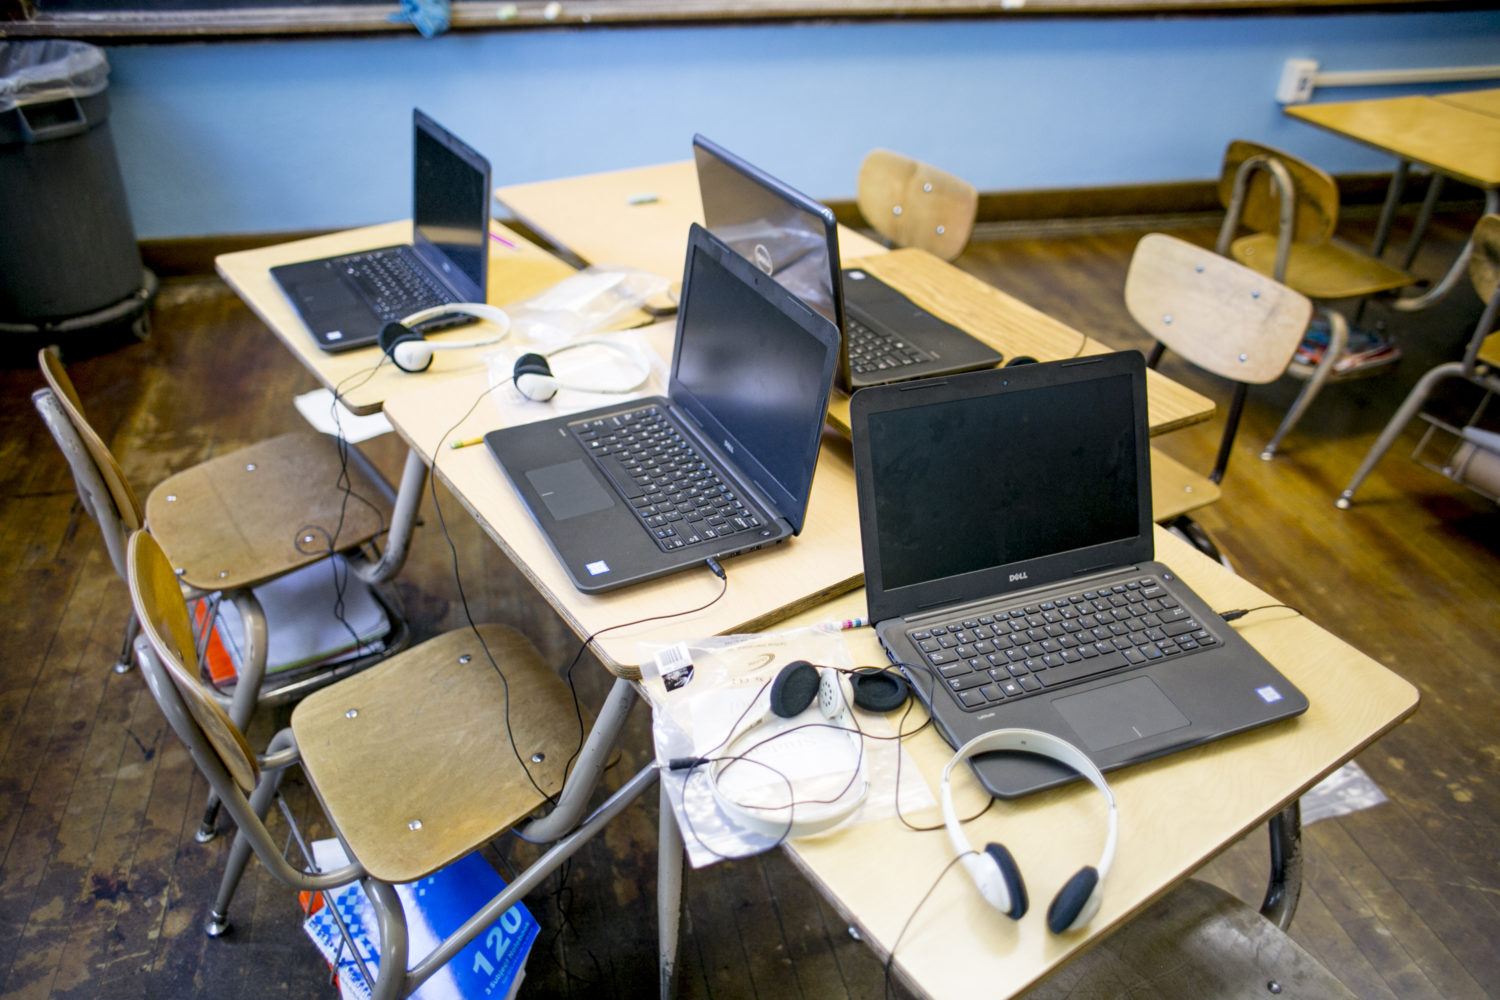 Federal funds could help districts purchase laptops for students to use at home while schools are closed.